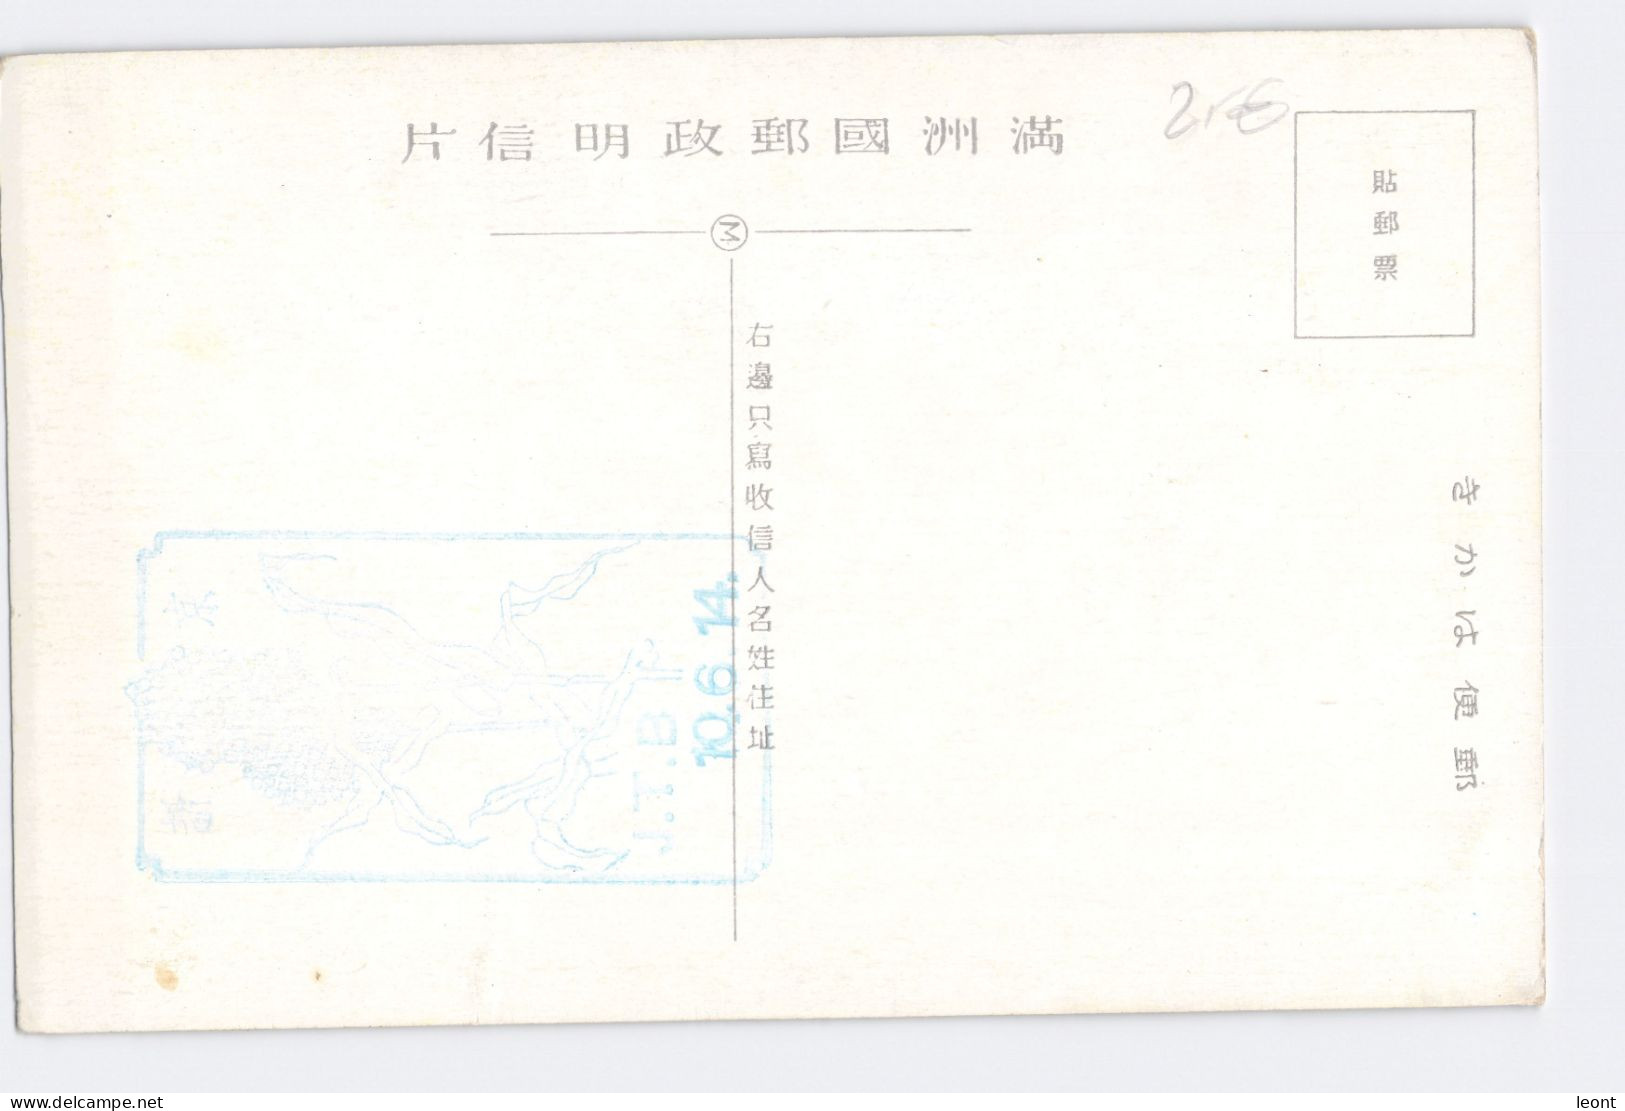 Japan - various topographical motives, some people - cca 1920 - used and unused cards - 32 postcards